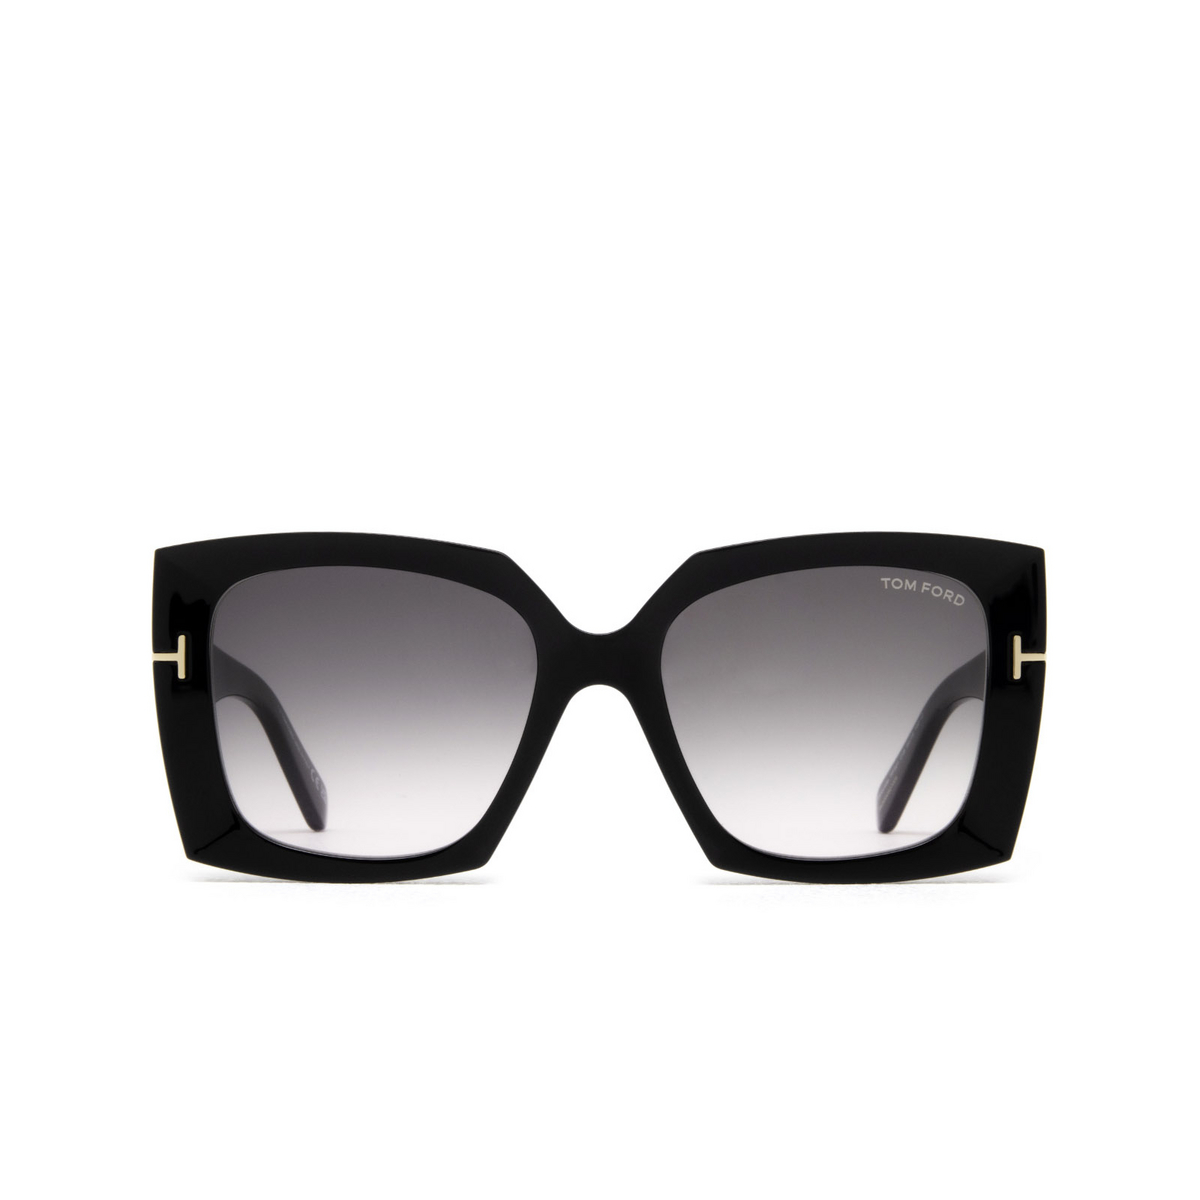 Tom Ford JACQUETTA Sunglasses 01B Black - front view